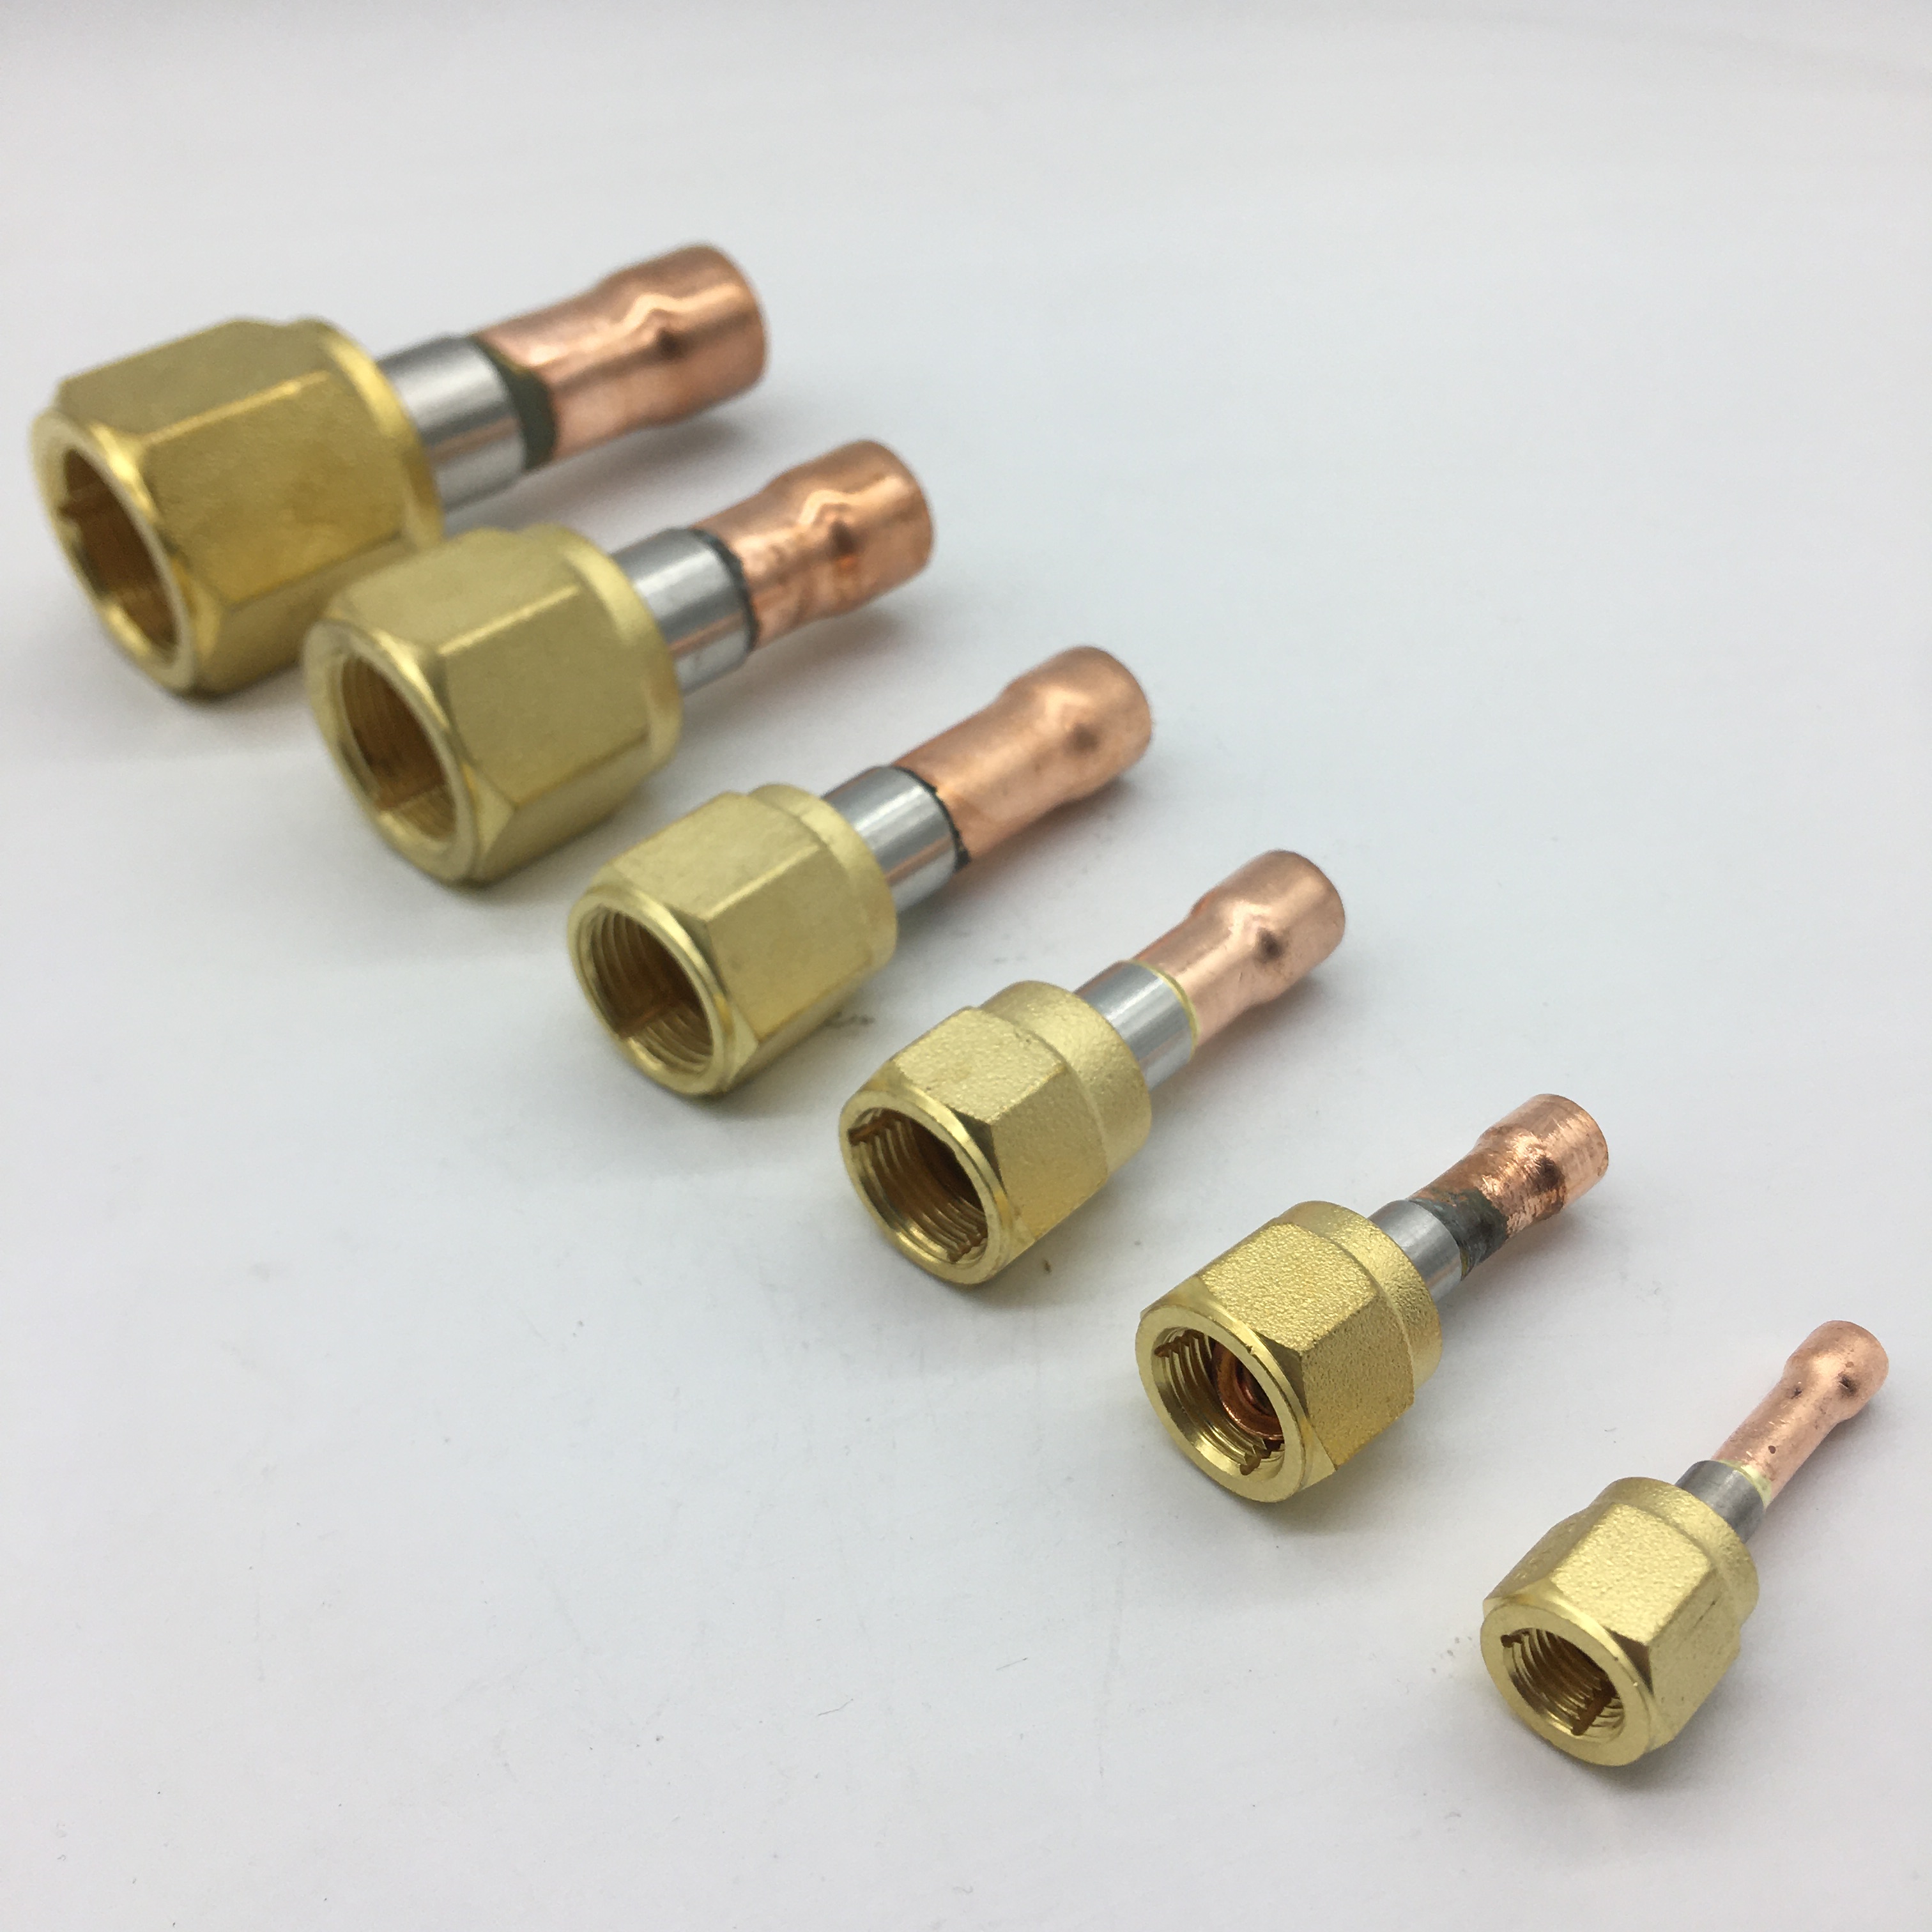 1/4" copper ODF X 1/4" female SAE thread straight joint is used as quick coupler in massive producing refrigeration appliances